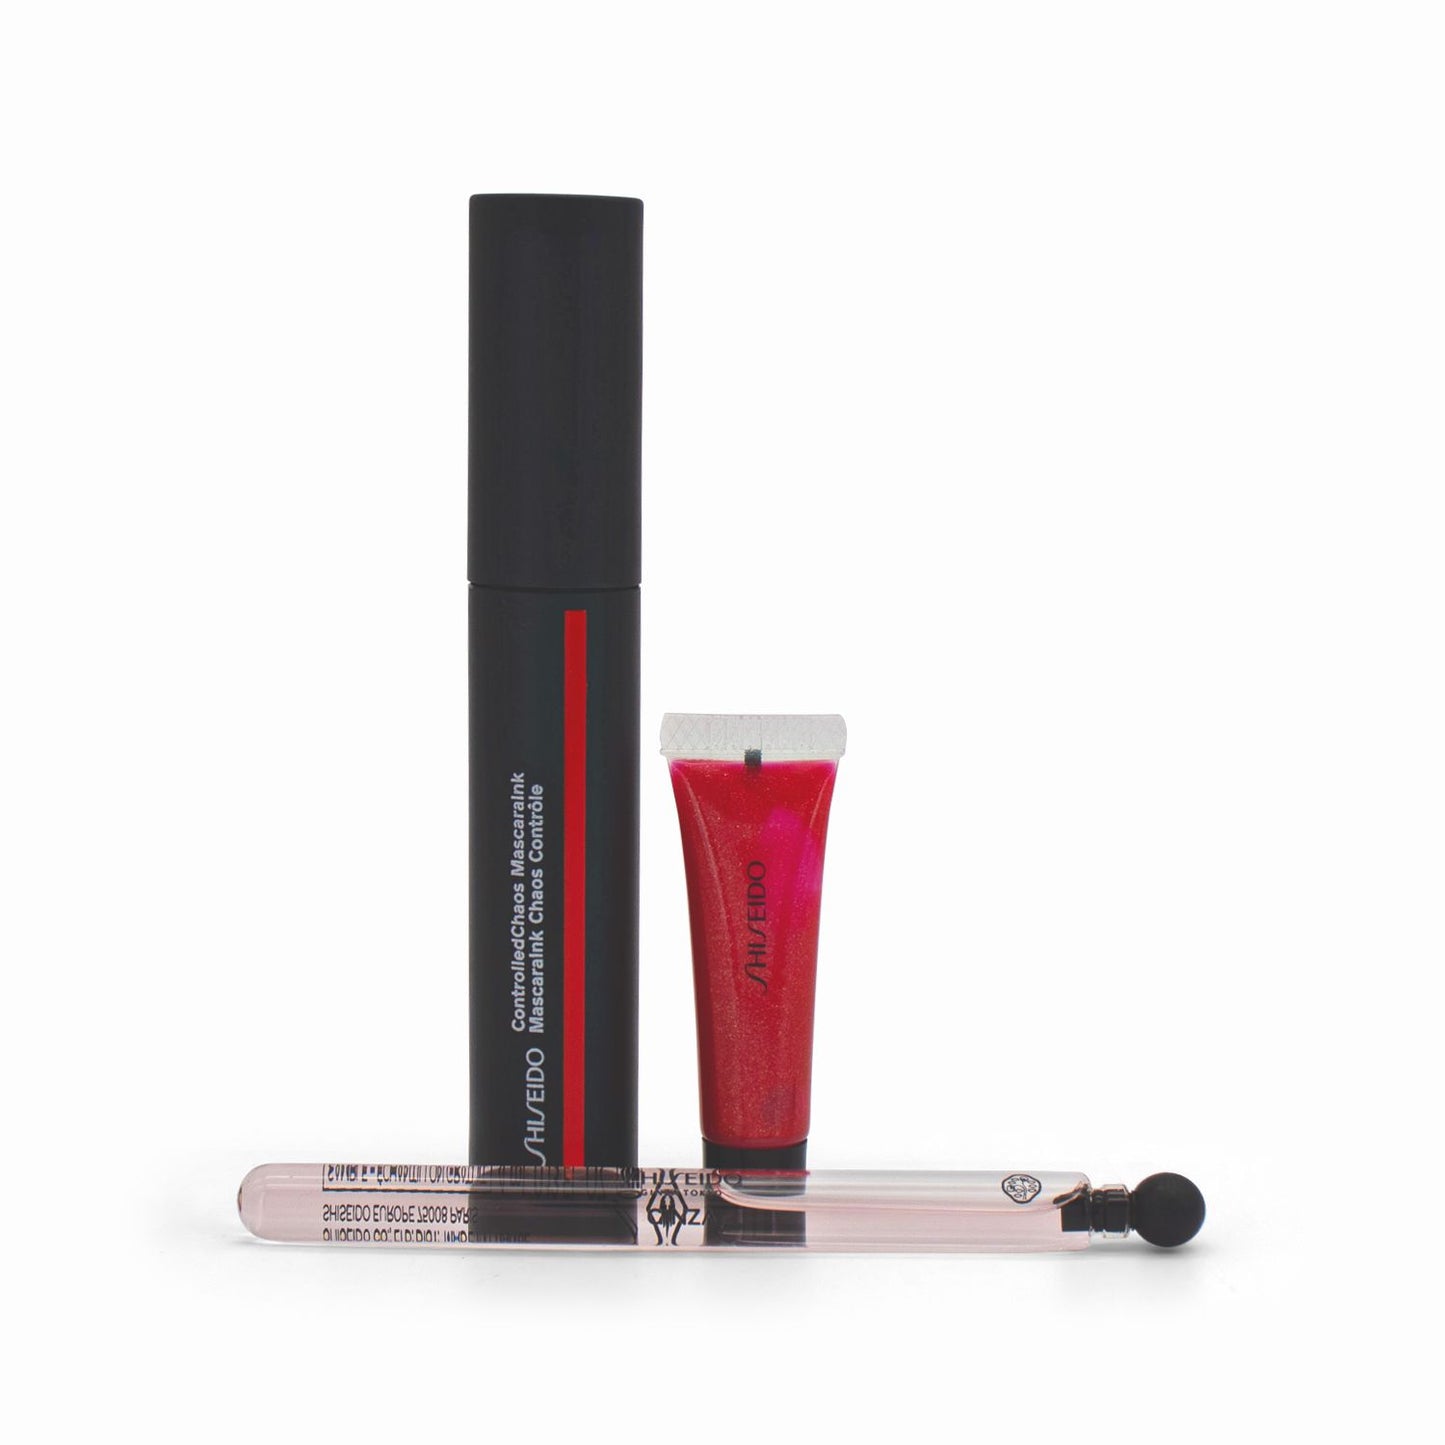 Shiseido Controlled Chaos Mascaraink With Perfume & Gloss Gift Set - Imperfect Box